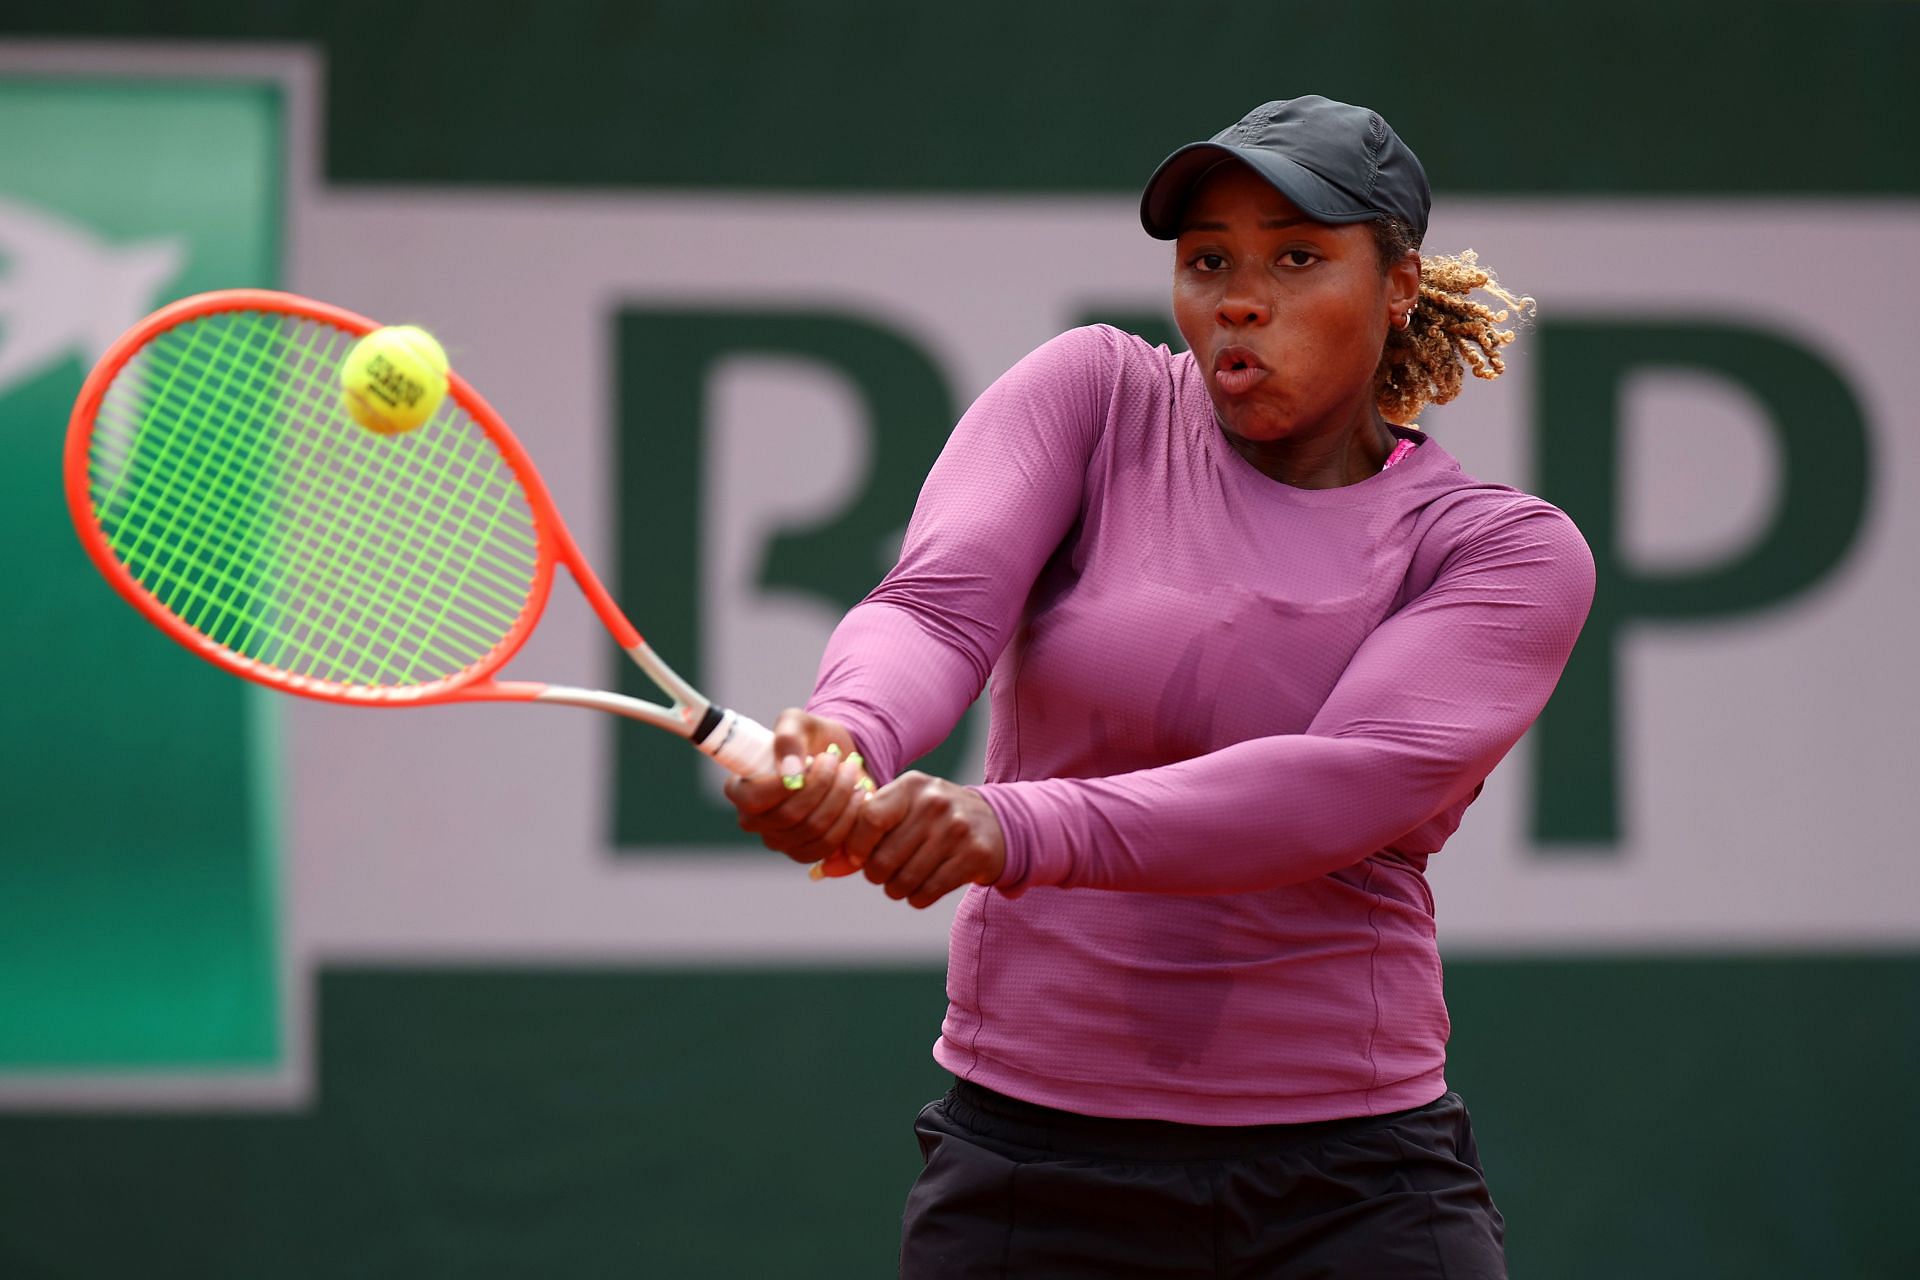 Townsend will seek to make a significant comeback in WTA singles tournaments